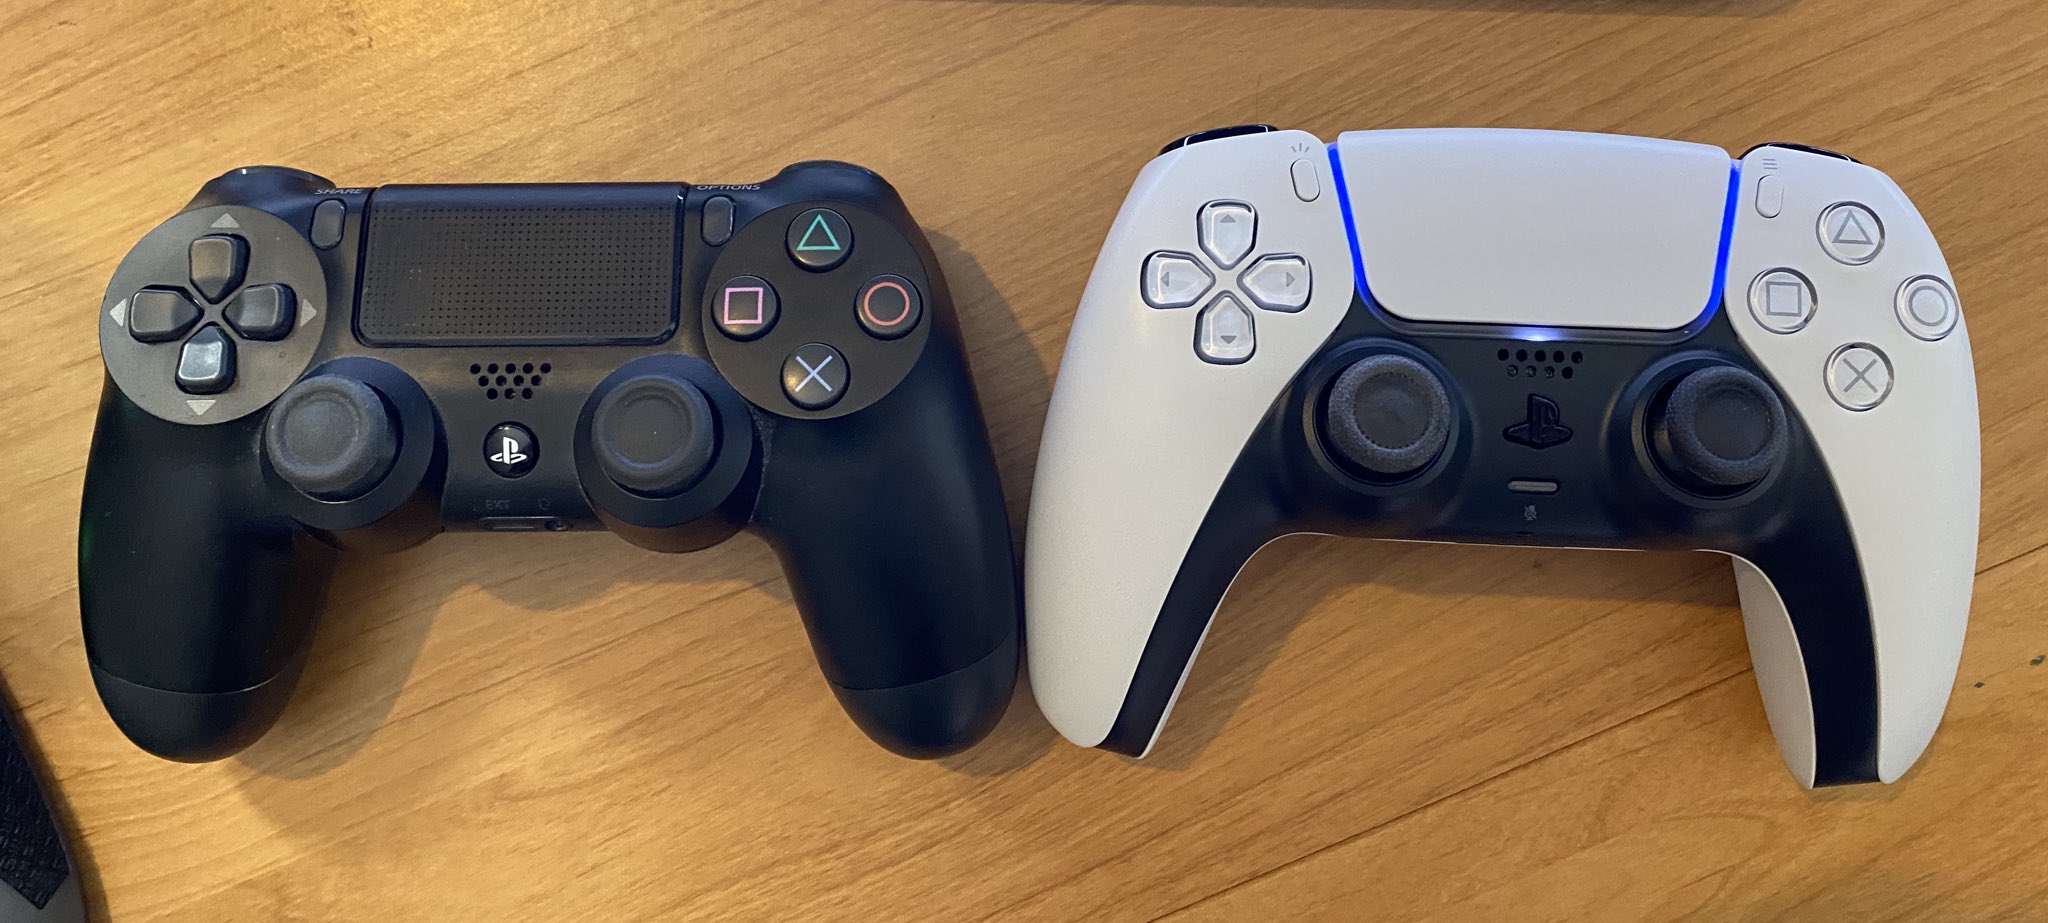 First PS5 hands-on: See DualSense in action right now | Tom's Guide